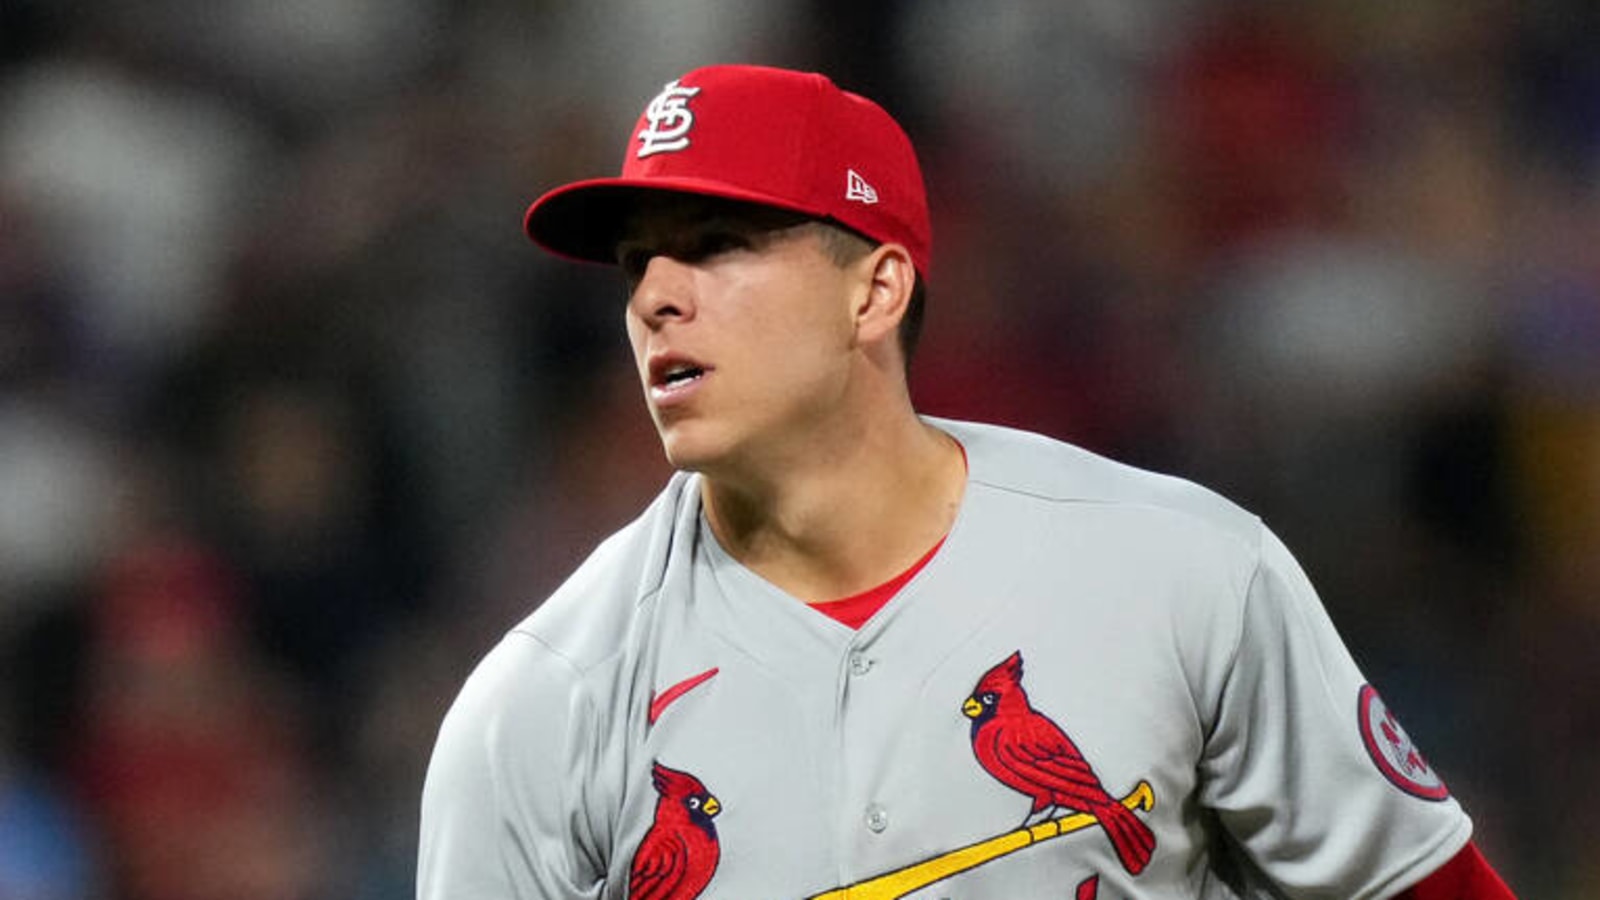 Cardinals All-Star RHP activated from IL, will be eased back into bullpen